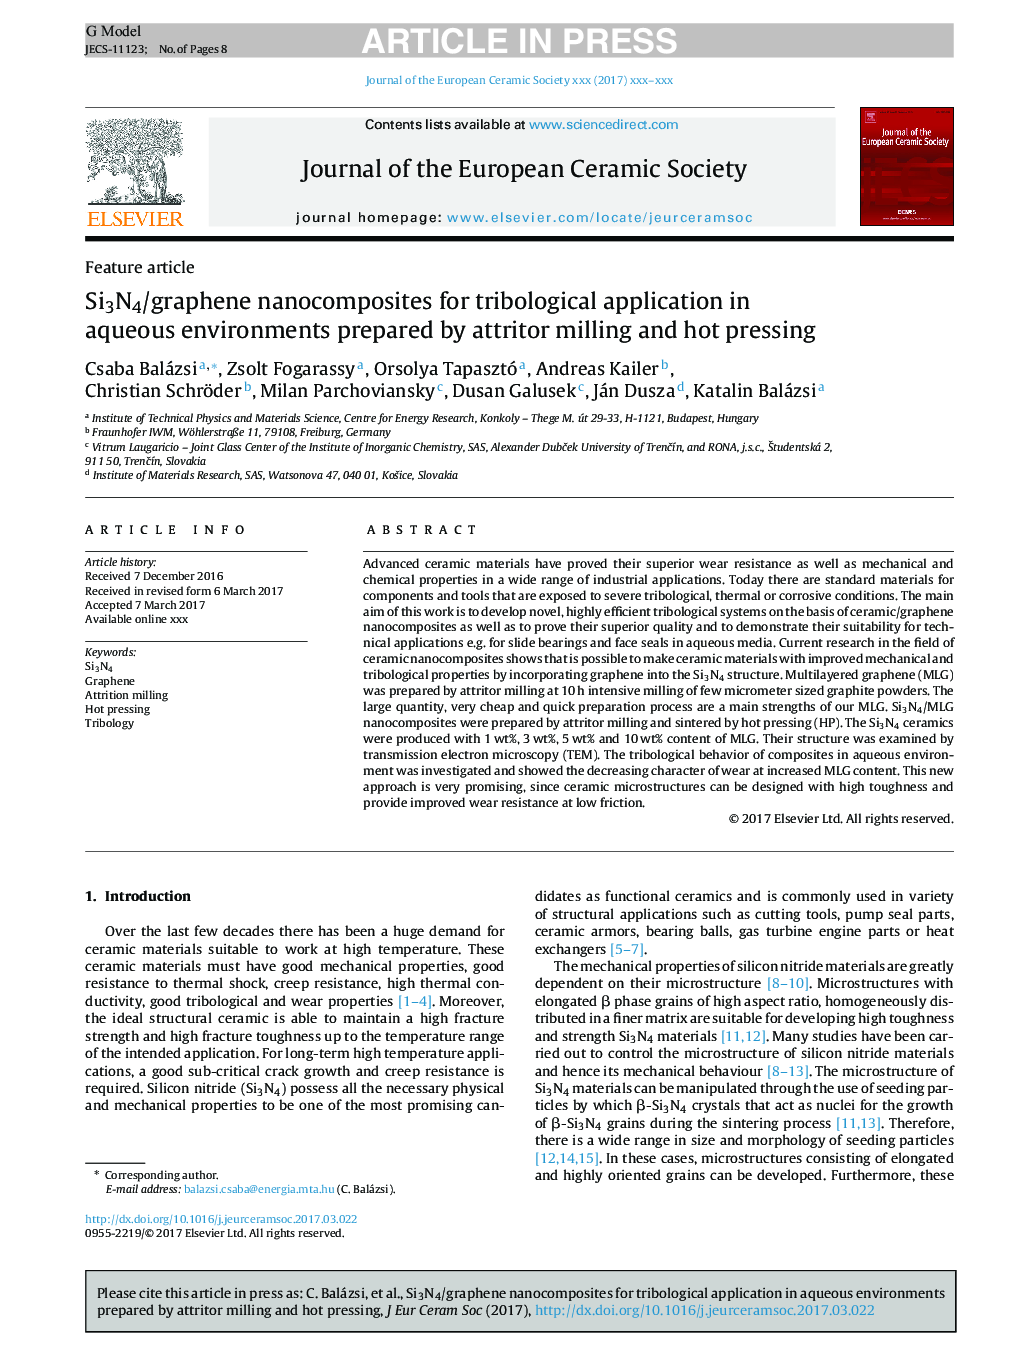 Si3N4/graphene nanocomposites for tribological application in aqueous environments prepared by attritor milling and hot pressing